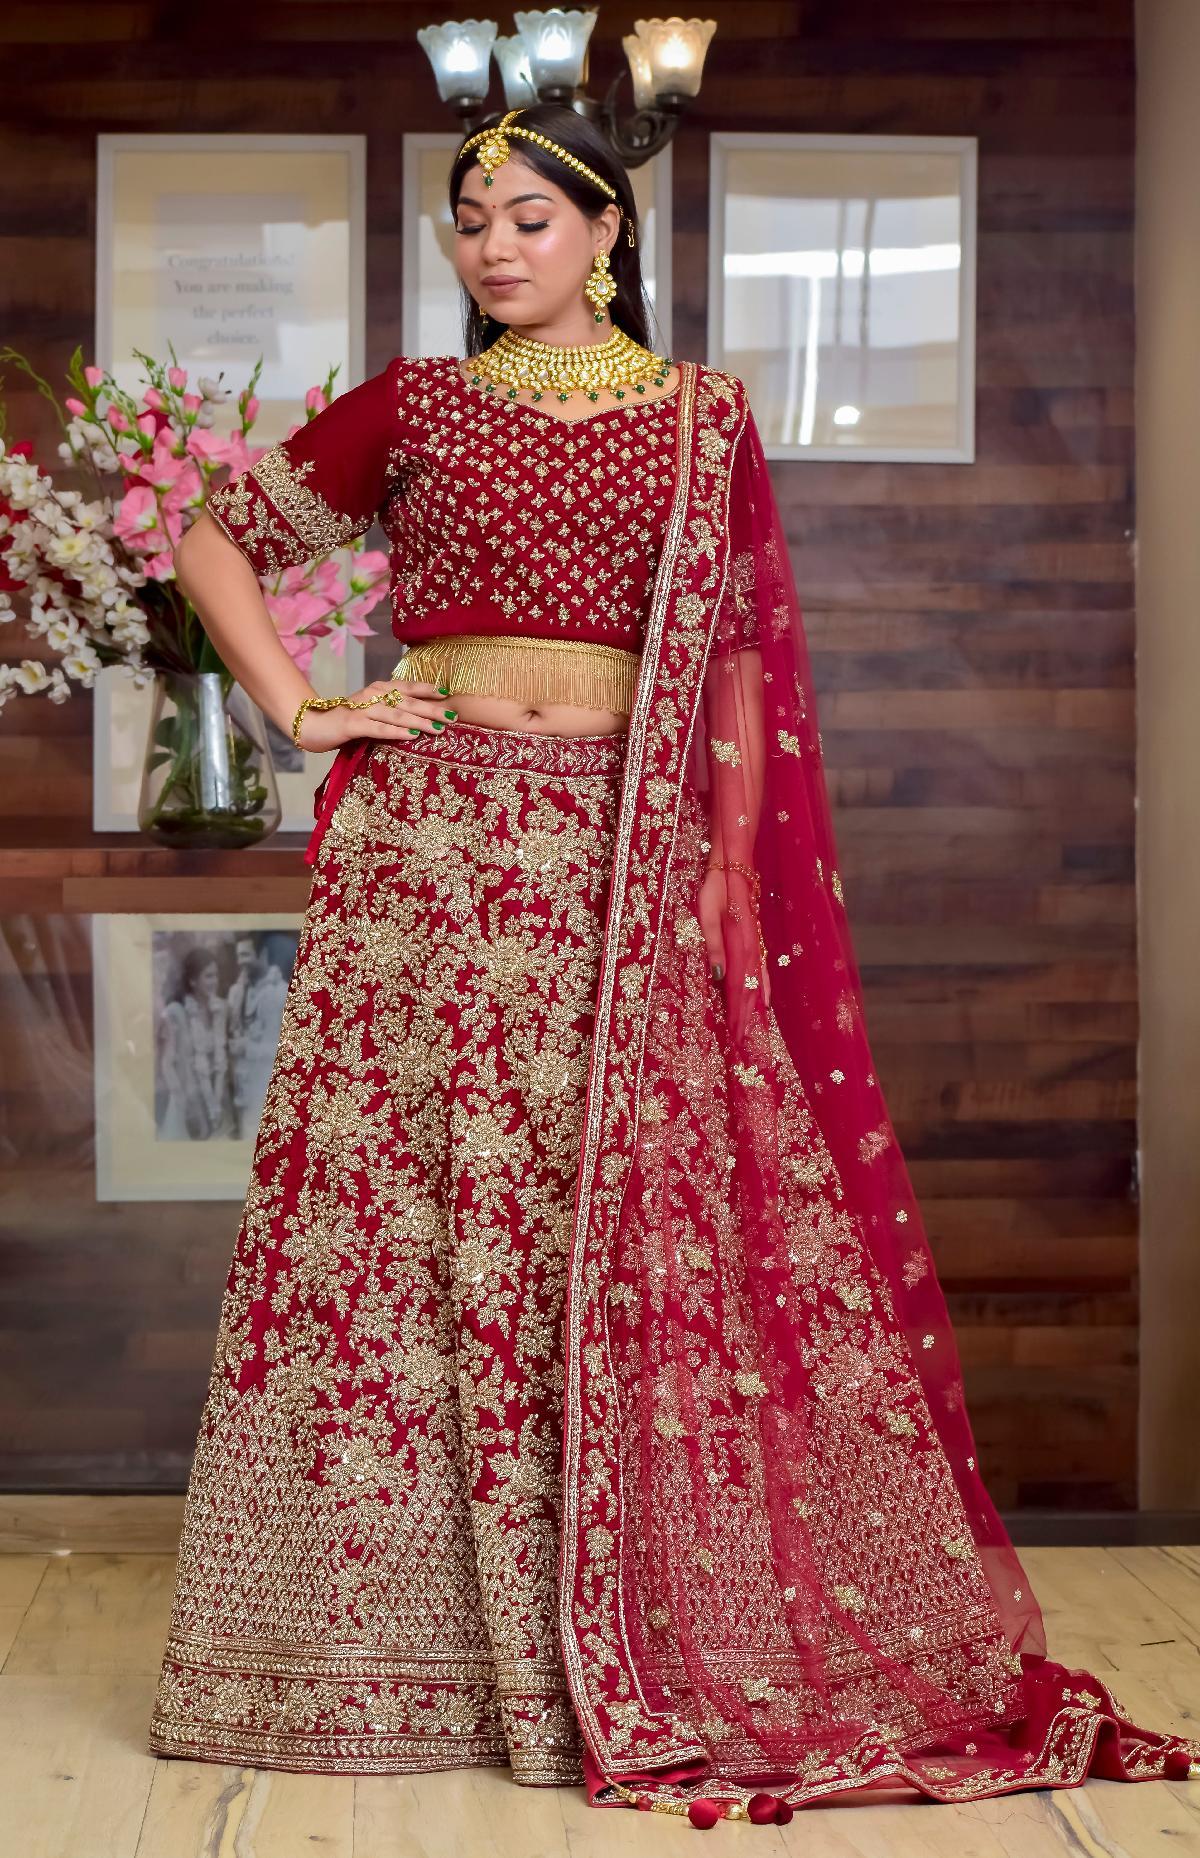 Designer Red Indian Bridal Long Trail Lehenga Choli with Golden Embroidery -